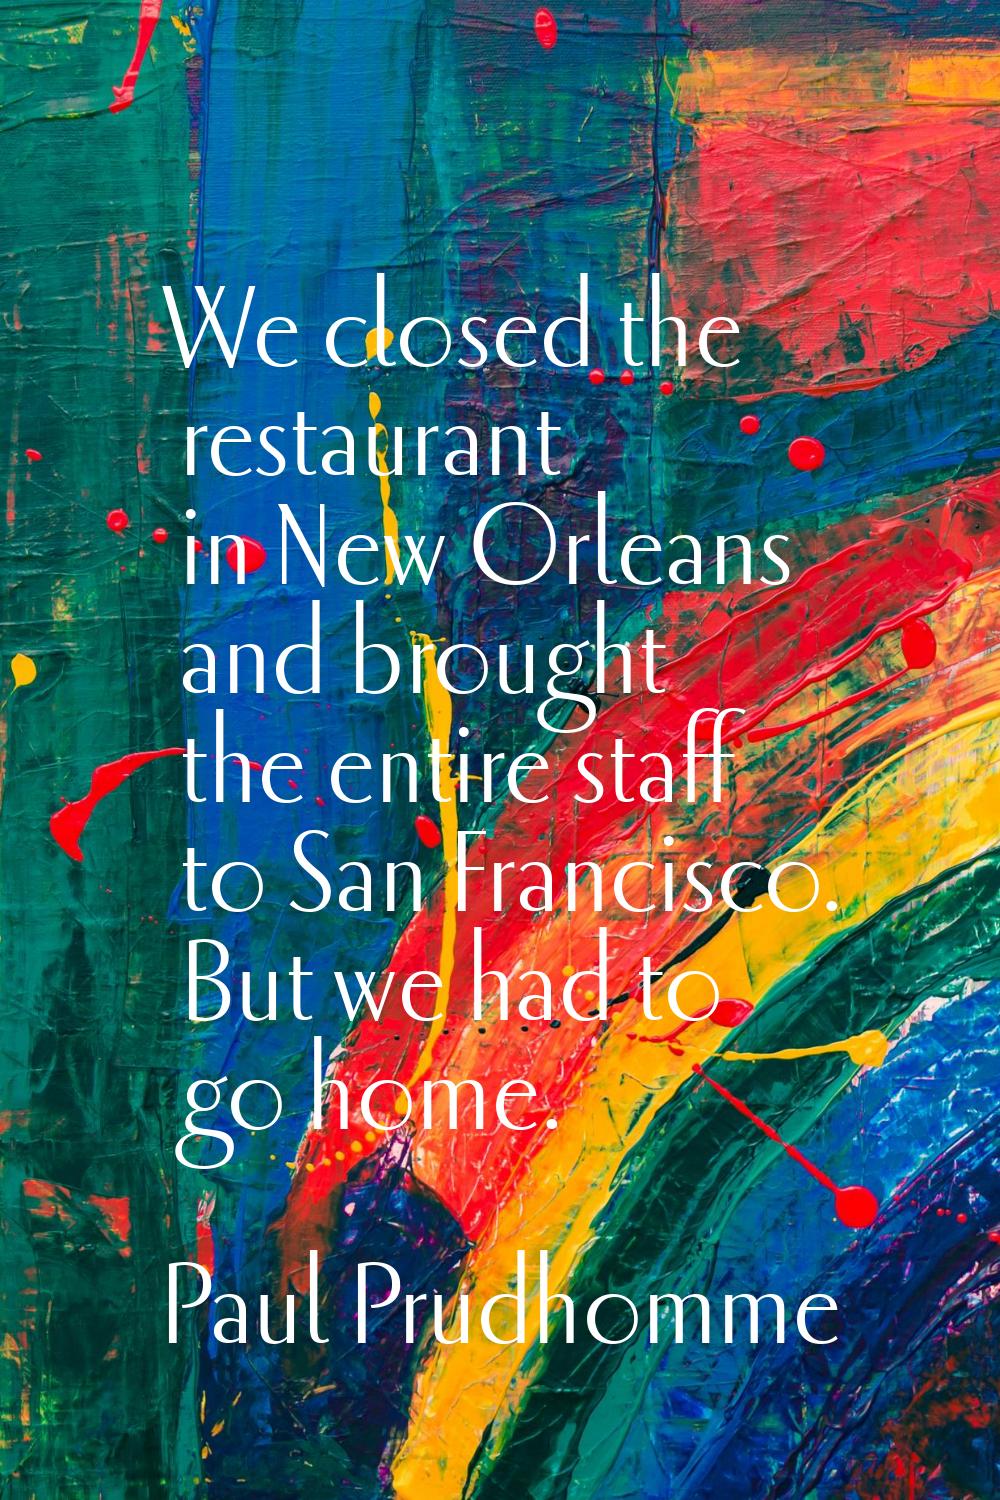 We closed the restaurant in New Orleans and brought the entire staff to San Francisco. But we had t